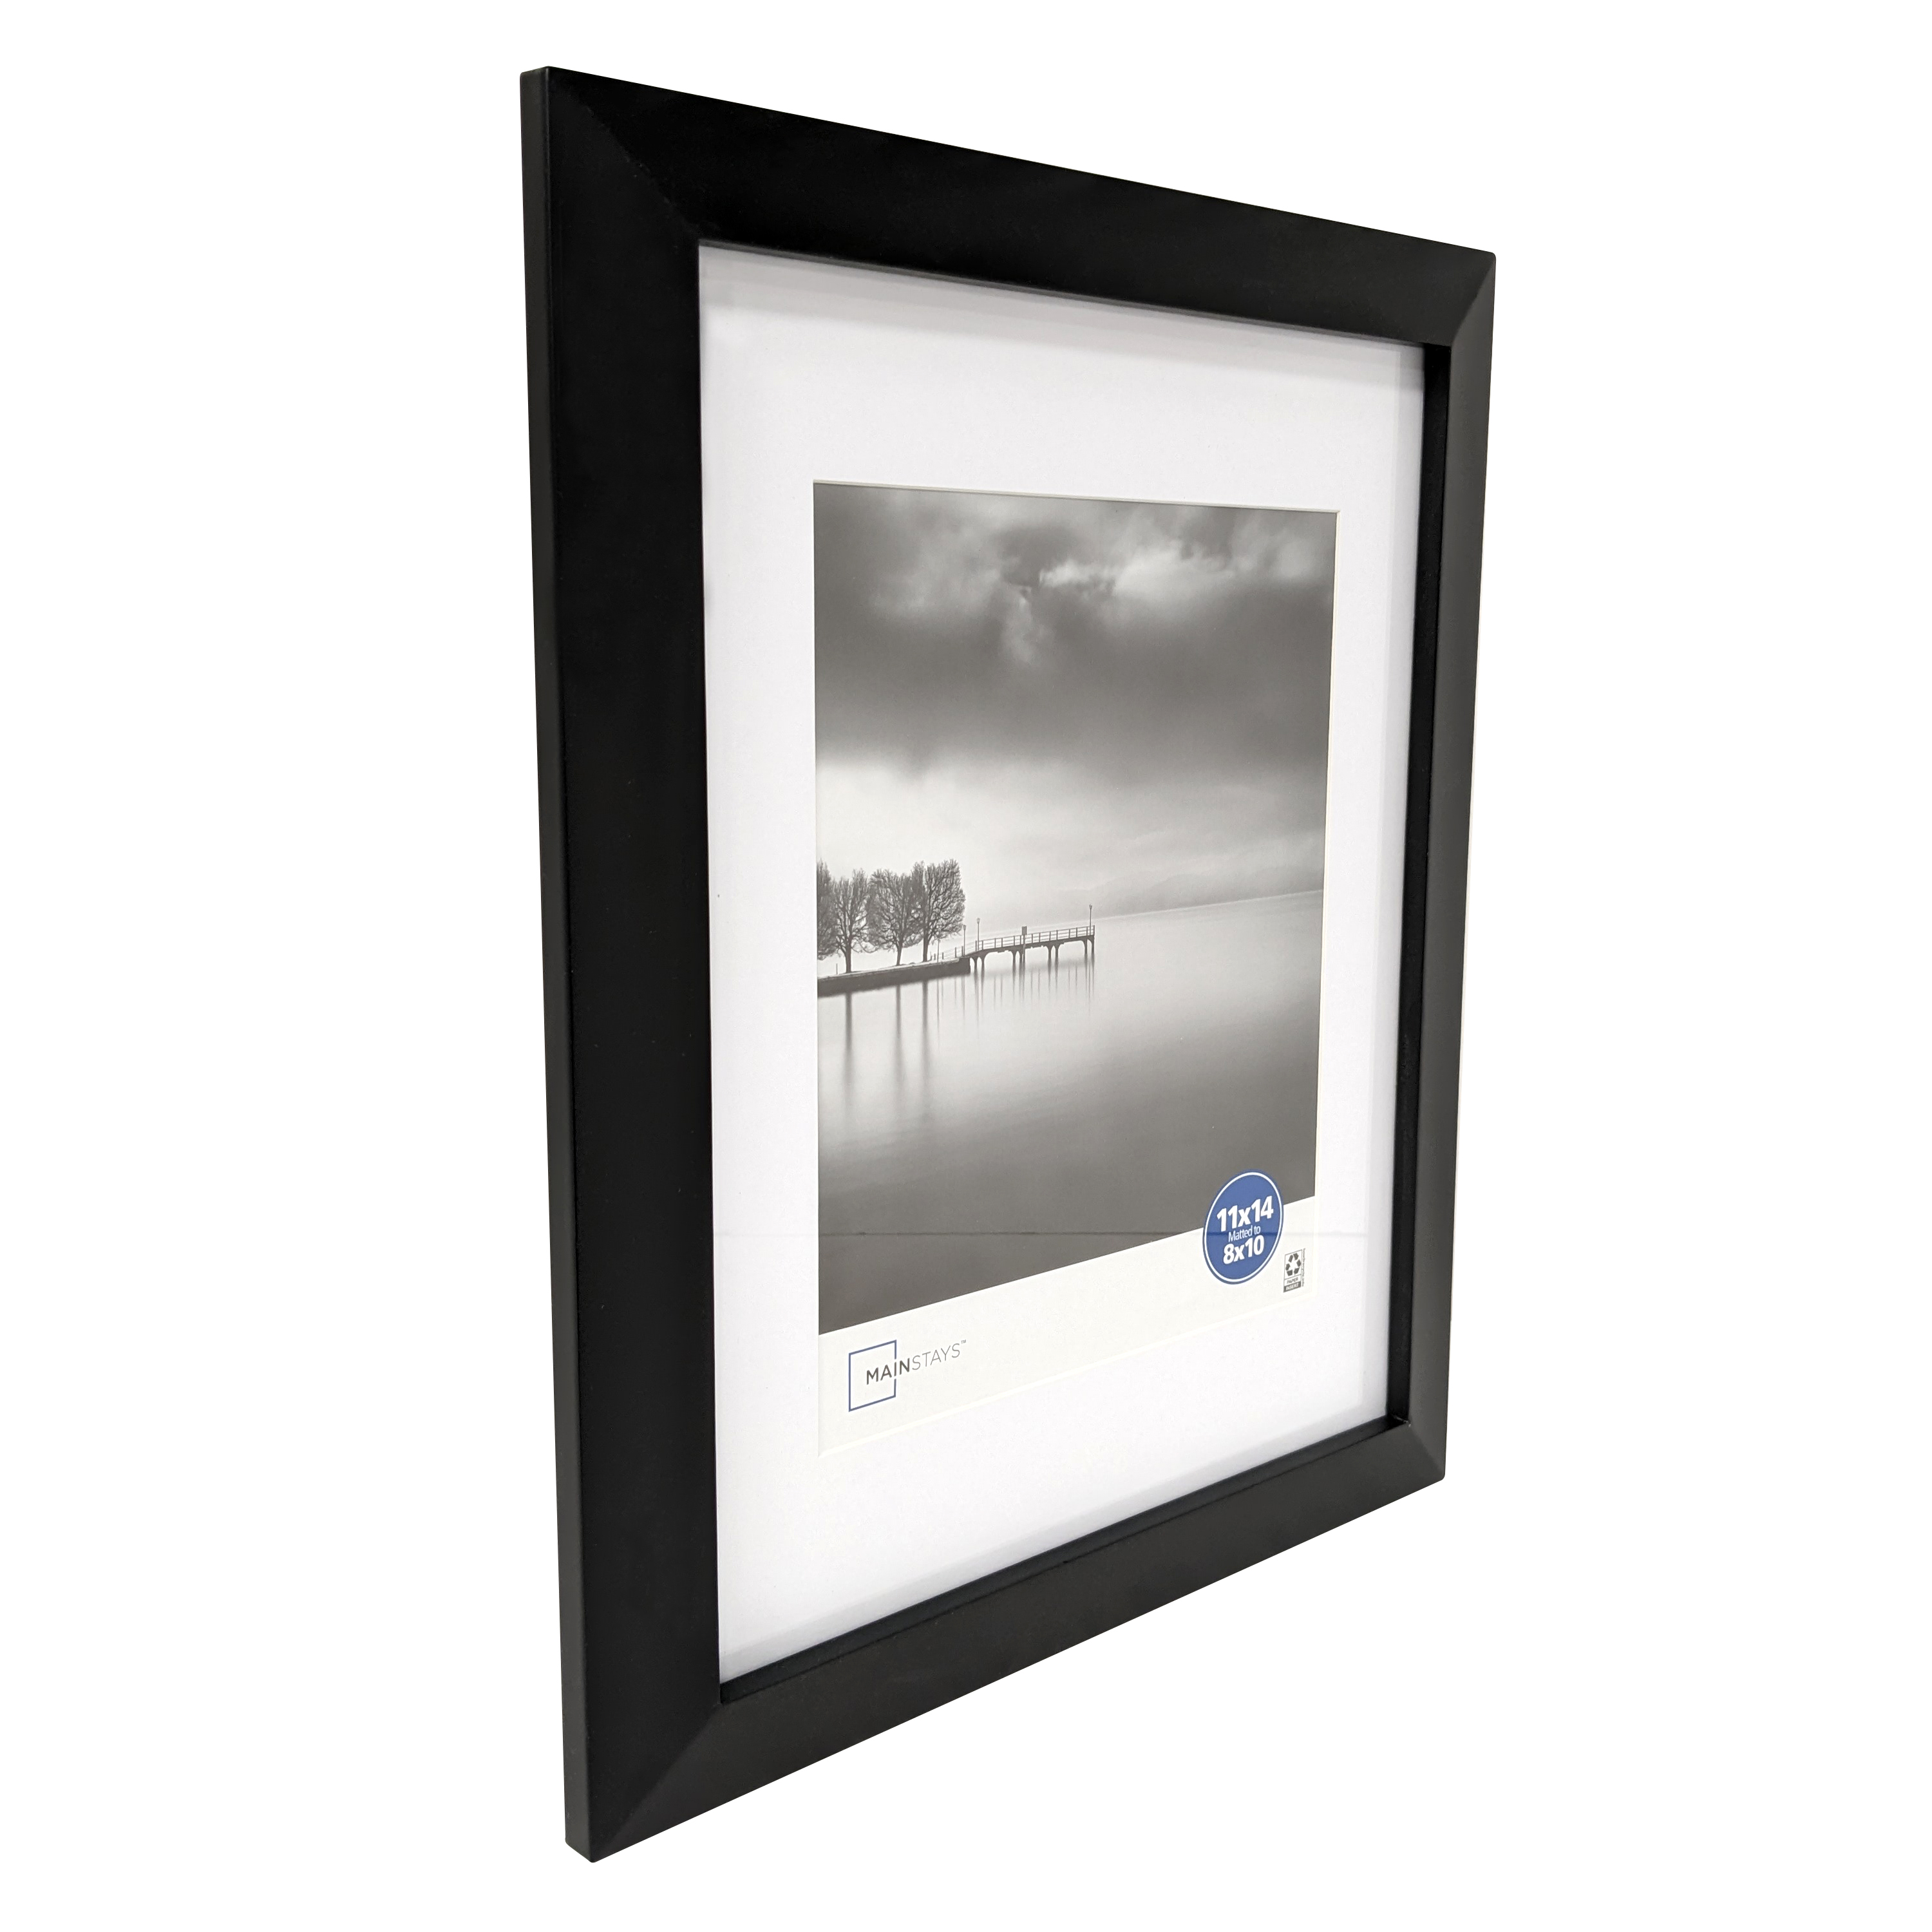 Mainstays 11x14 Matted to 8x10 Wide Beveled Tabletop Picture Frame, Black - image 4 of 7